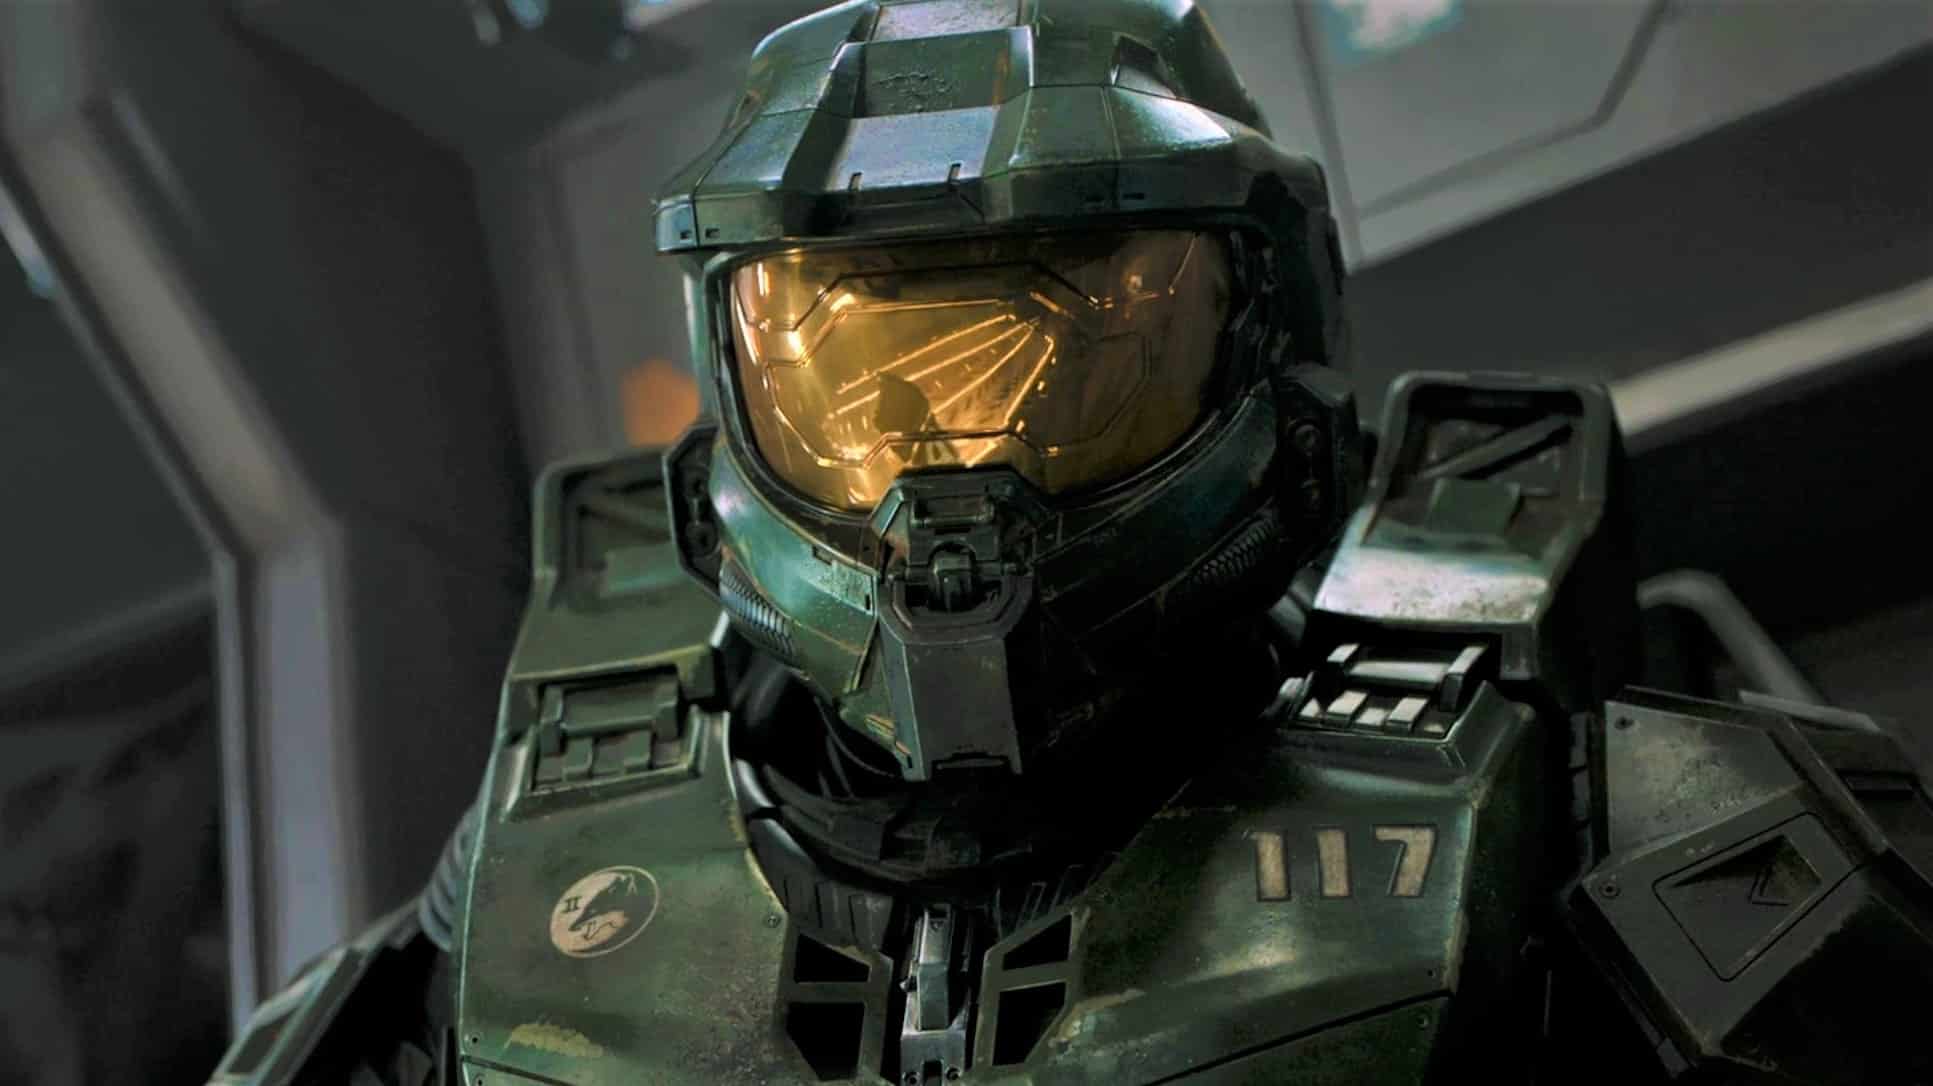 Production is finally starting on the 'Halo' TV series